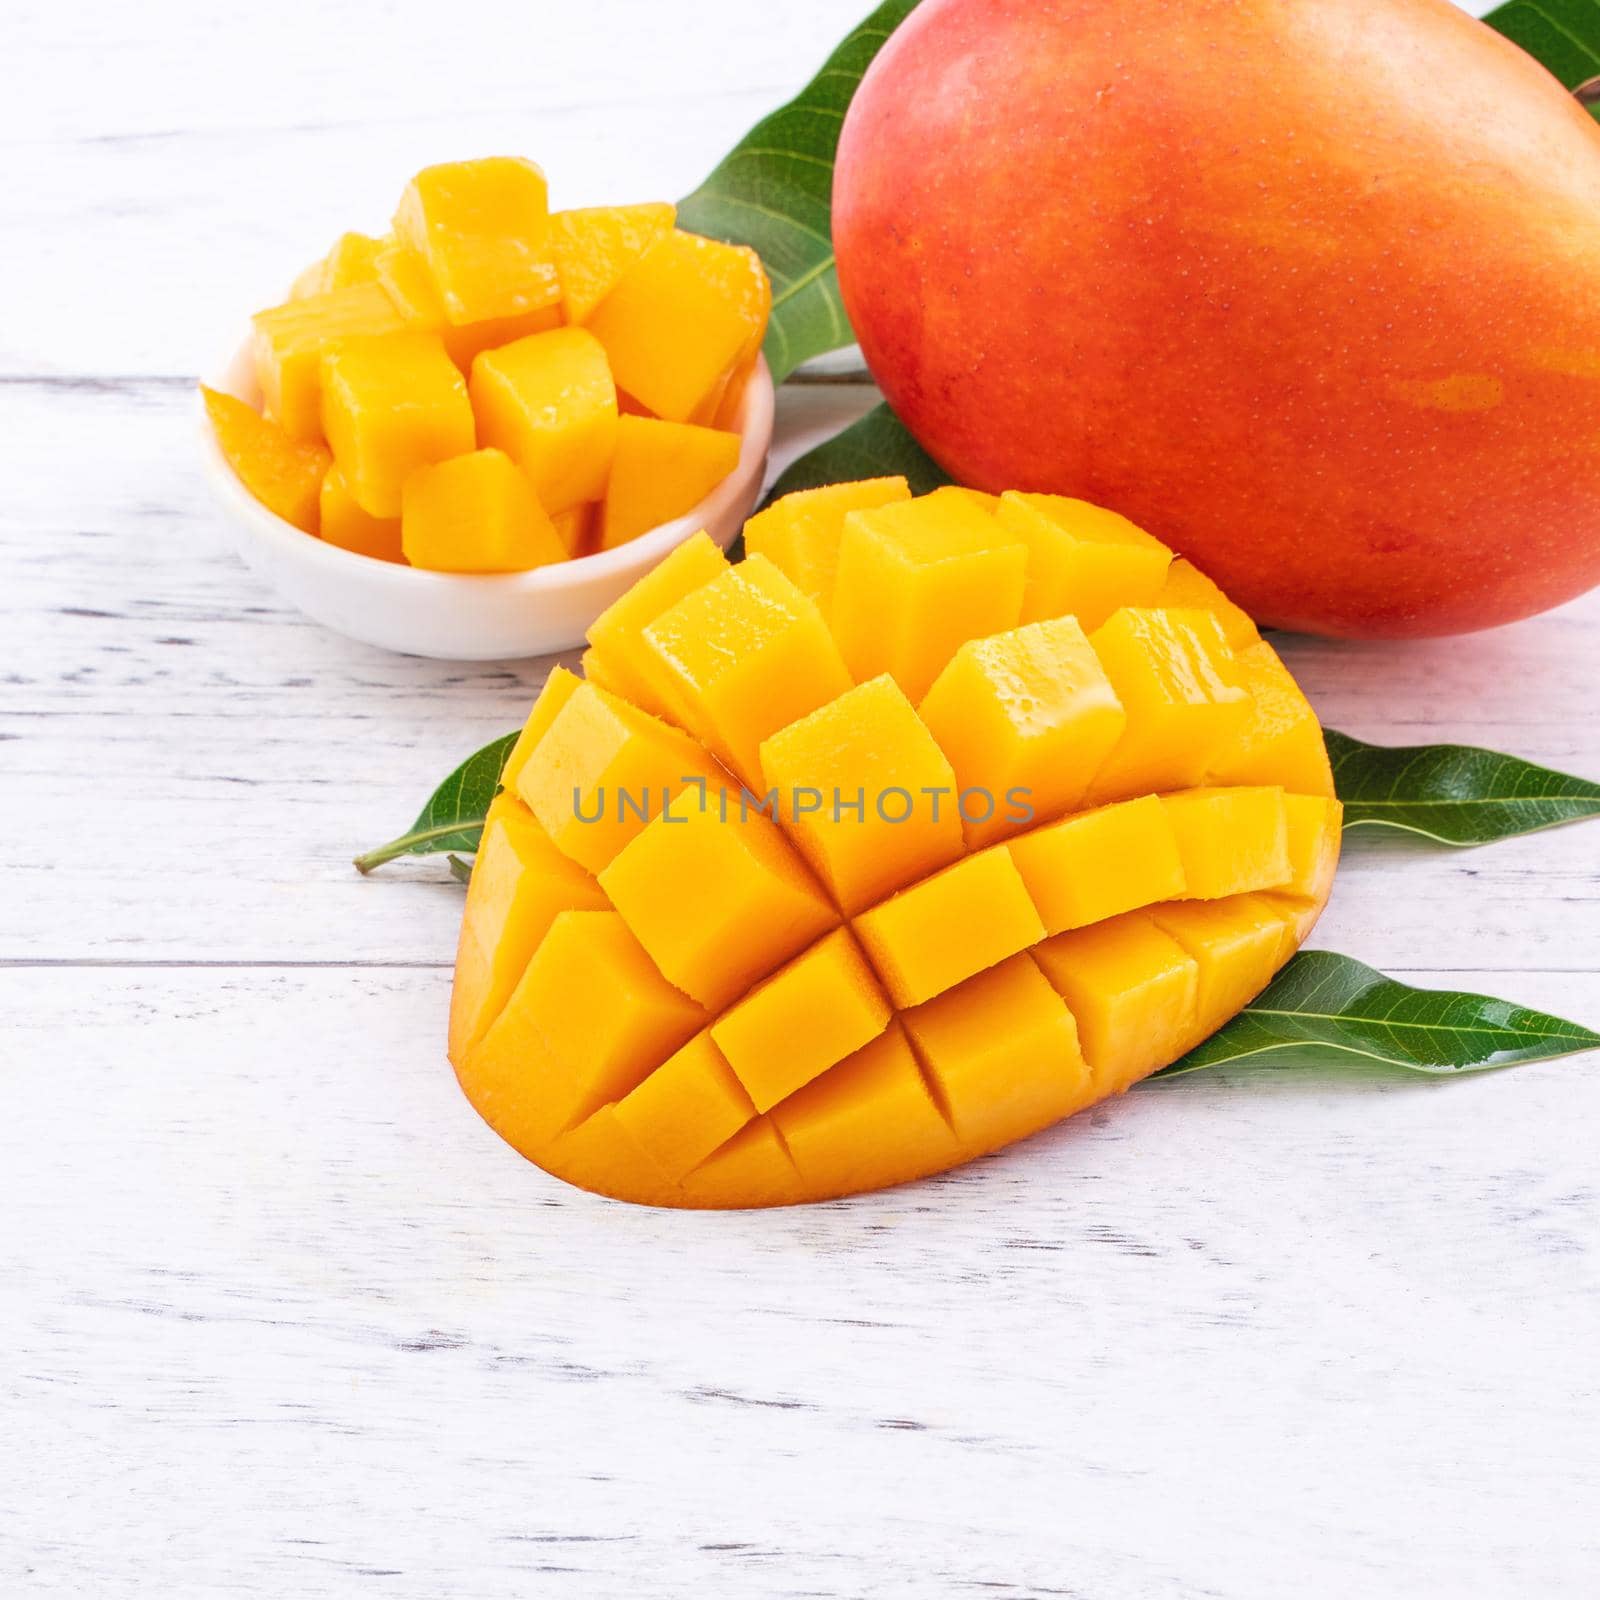 Fresh mango,beautiful chopped fruit with green leaves on bright wooden table background. Tropical fruit design concept, close up, copy space.